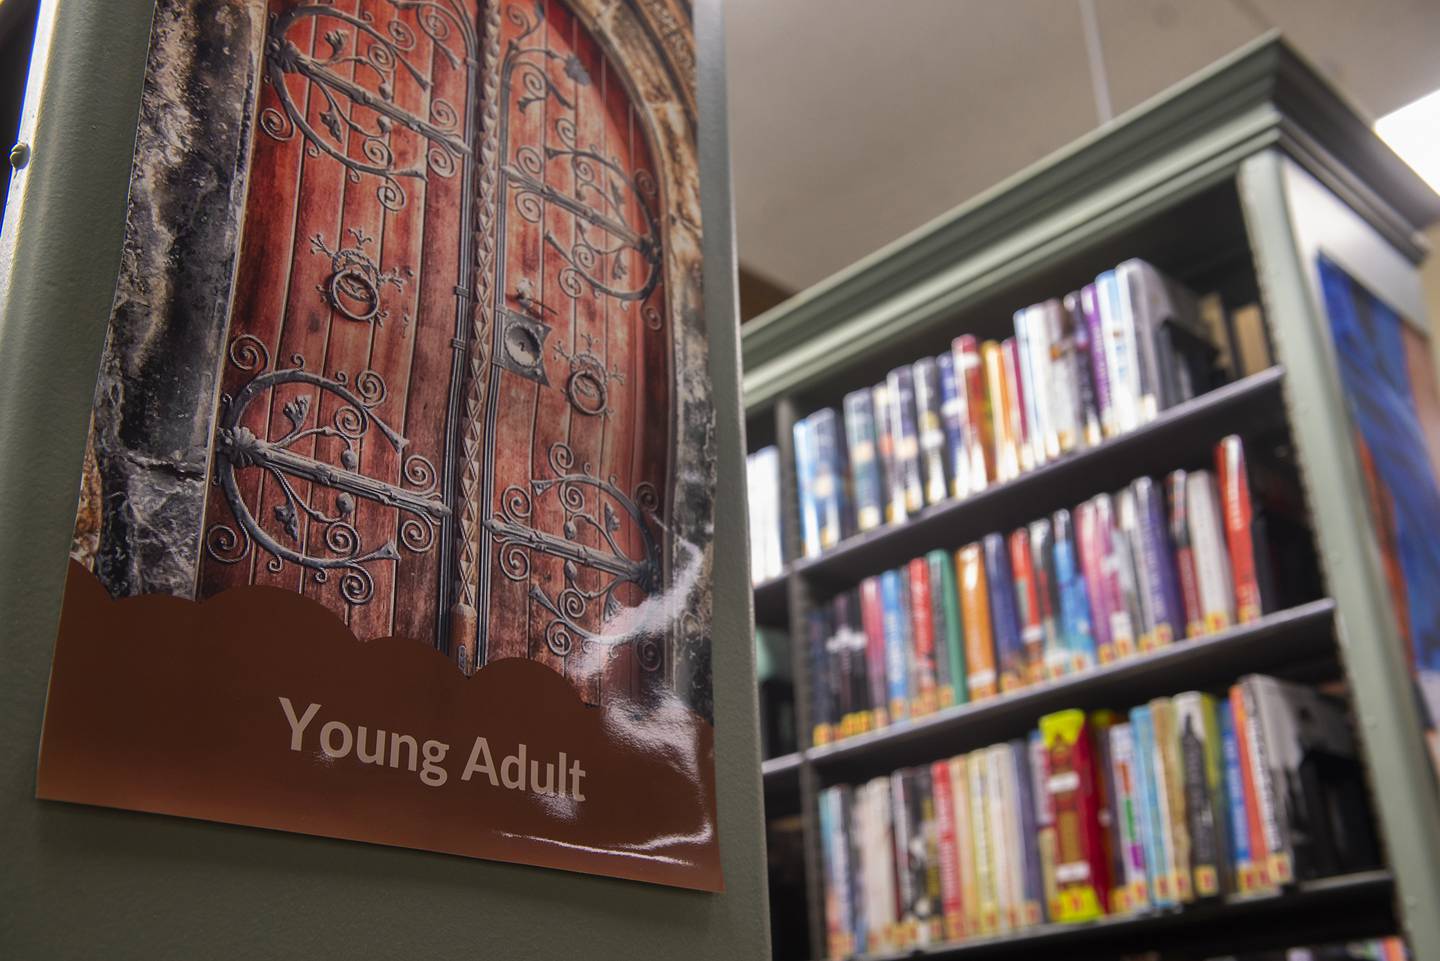 The books were displayed in a special Pride Month display near the young adult section of the Dixon Library.